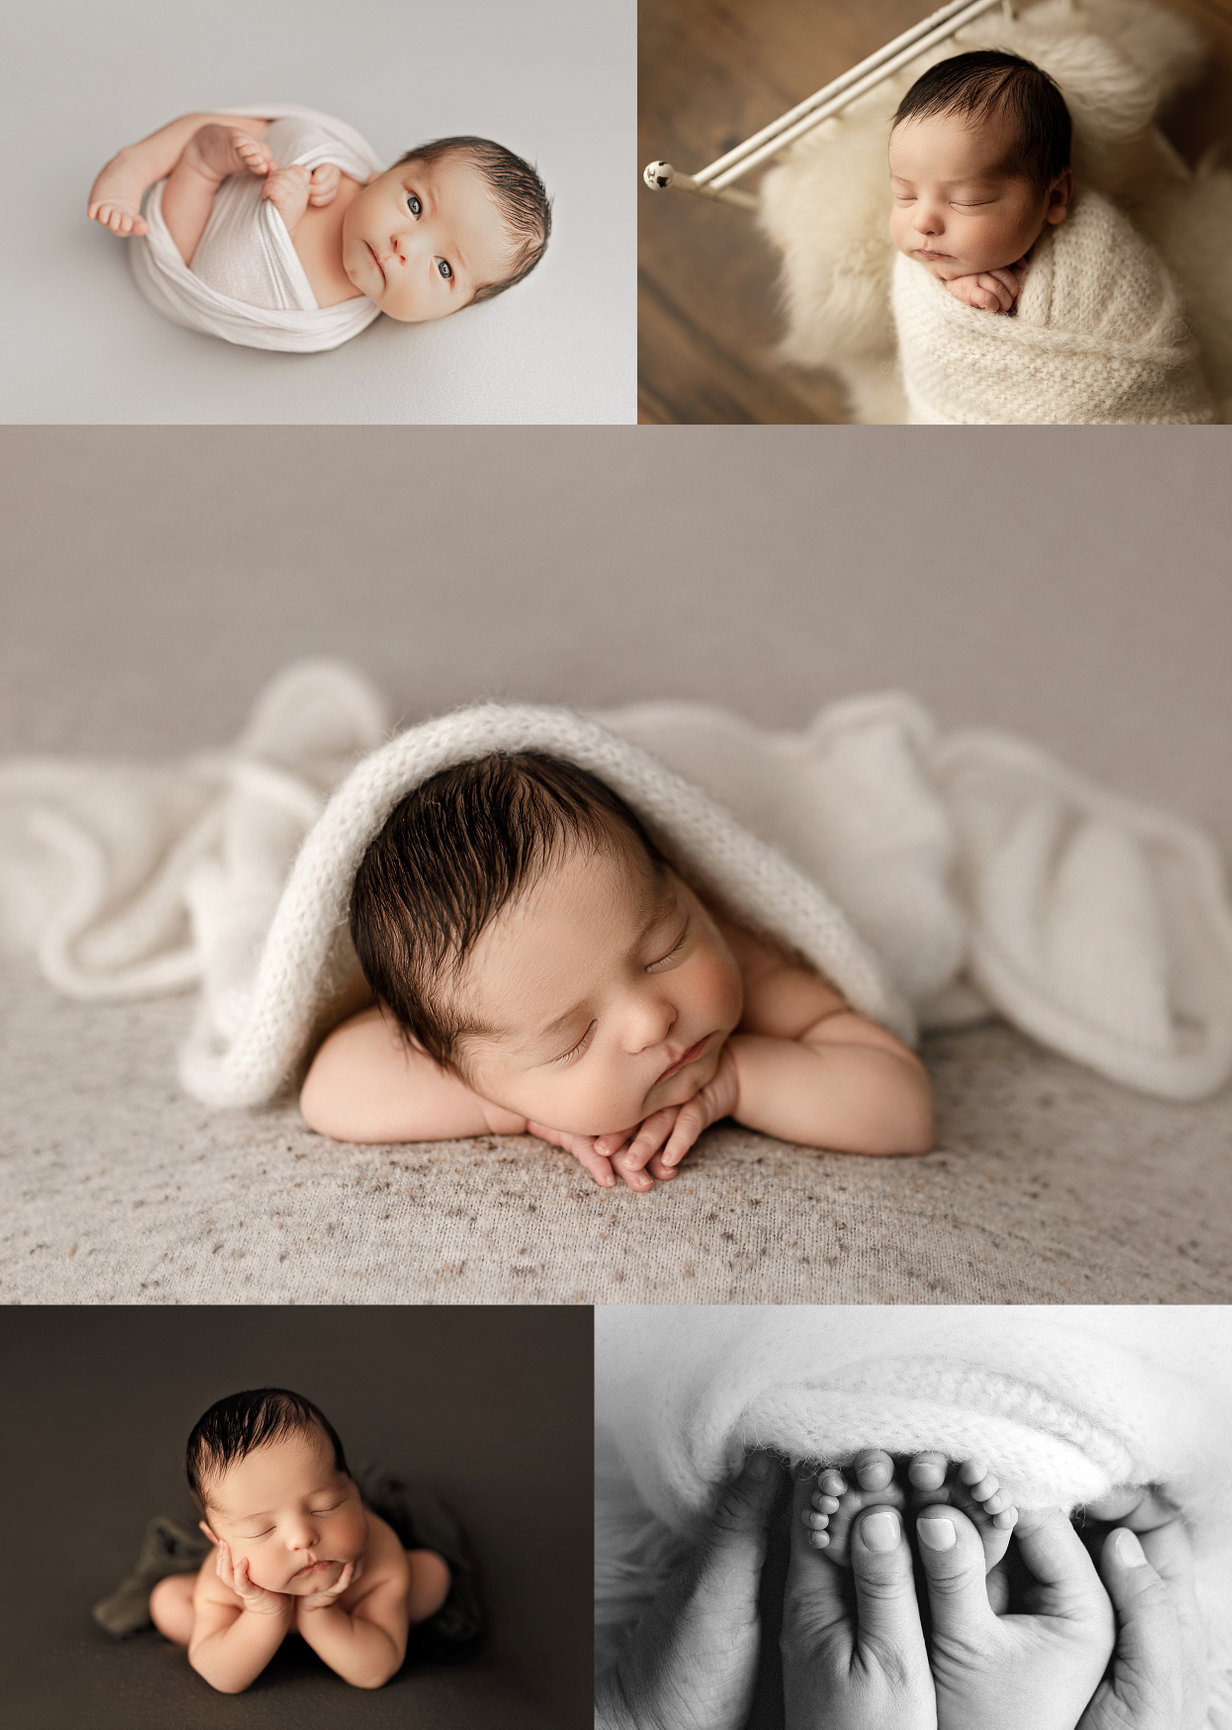 50+ Newborn Photography Ideas - Best Tips and Tricks! | The Dating Divas